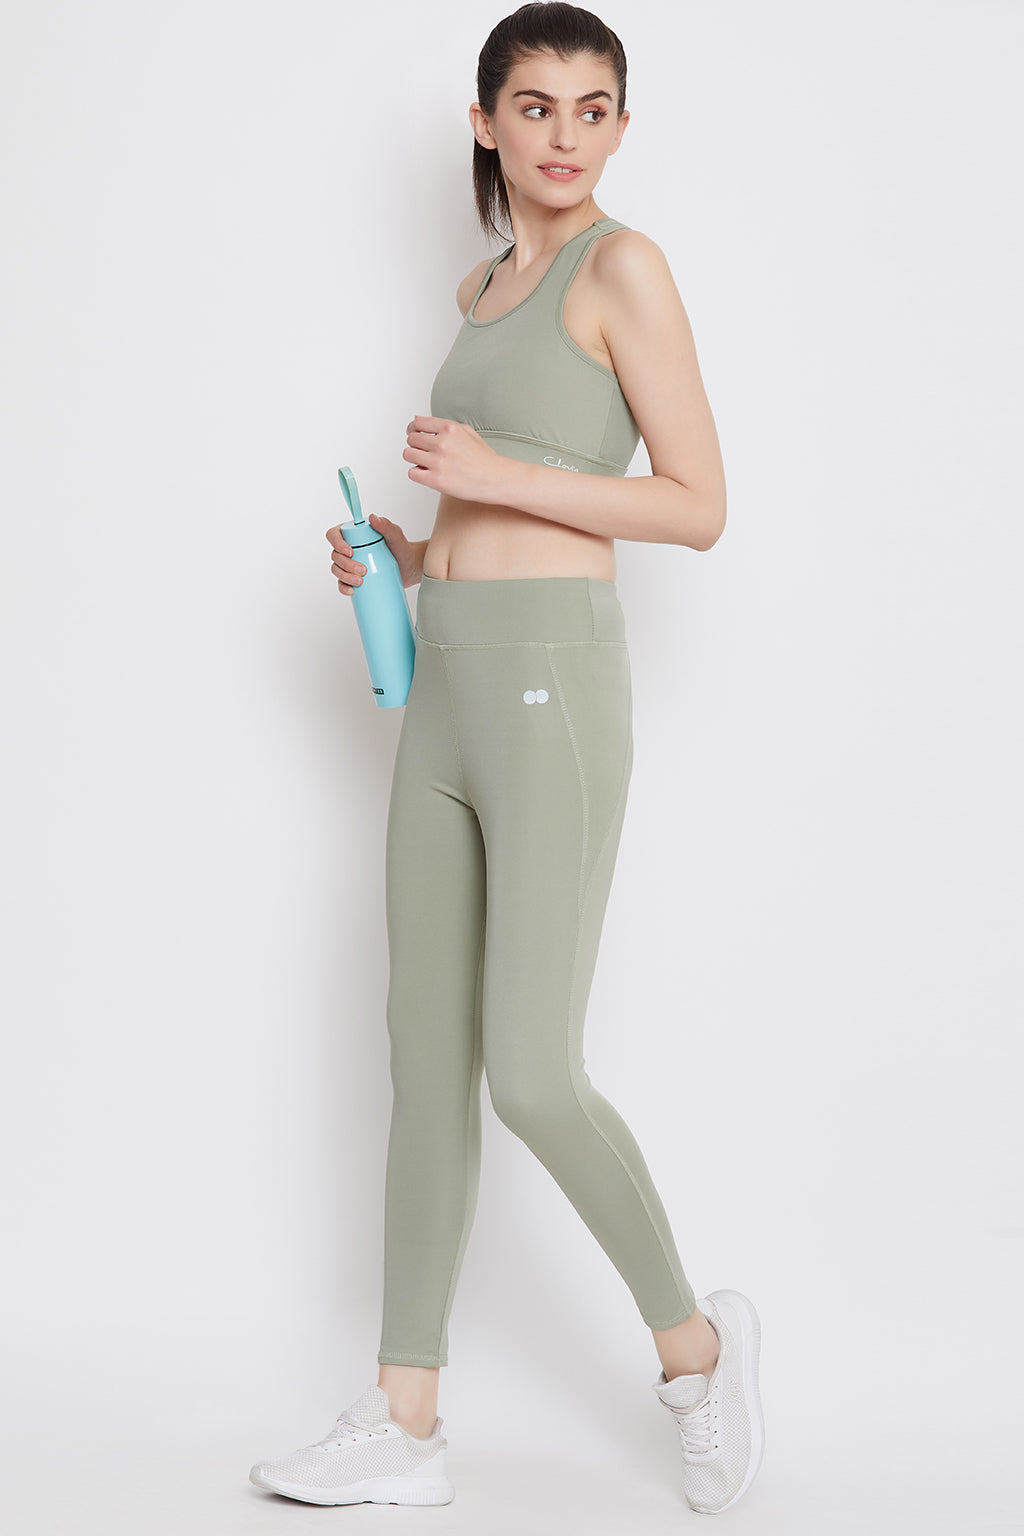 Activewear Ankle Length Tights in Sage Green – Tradyl